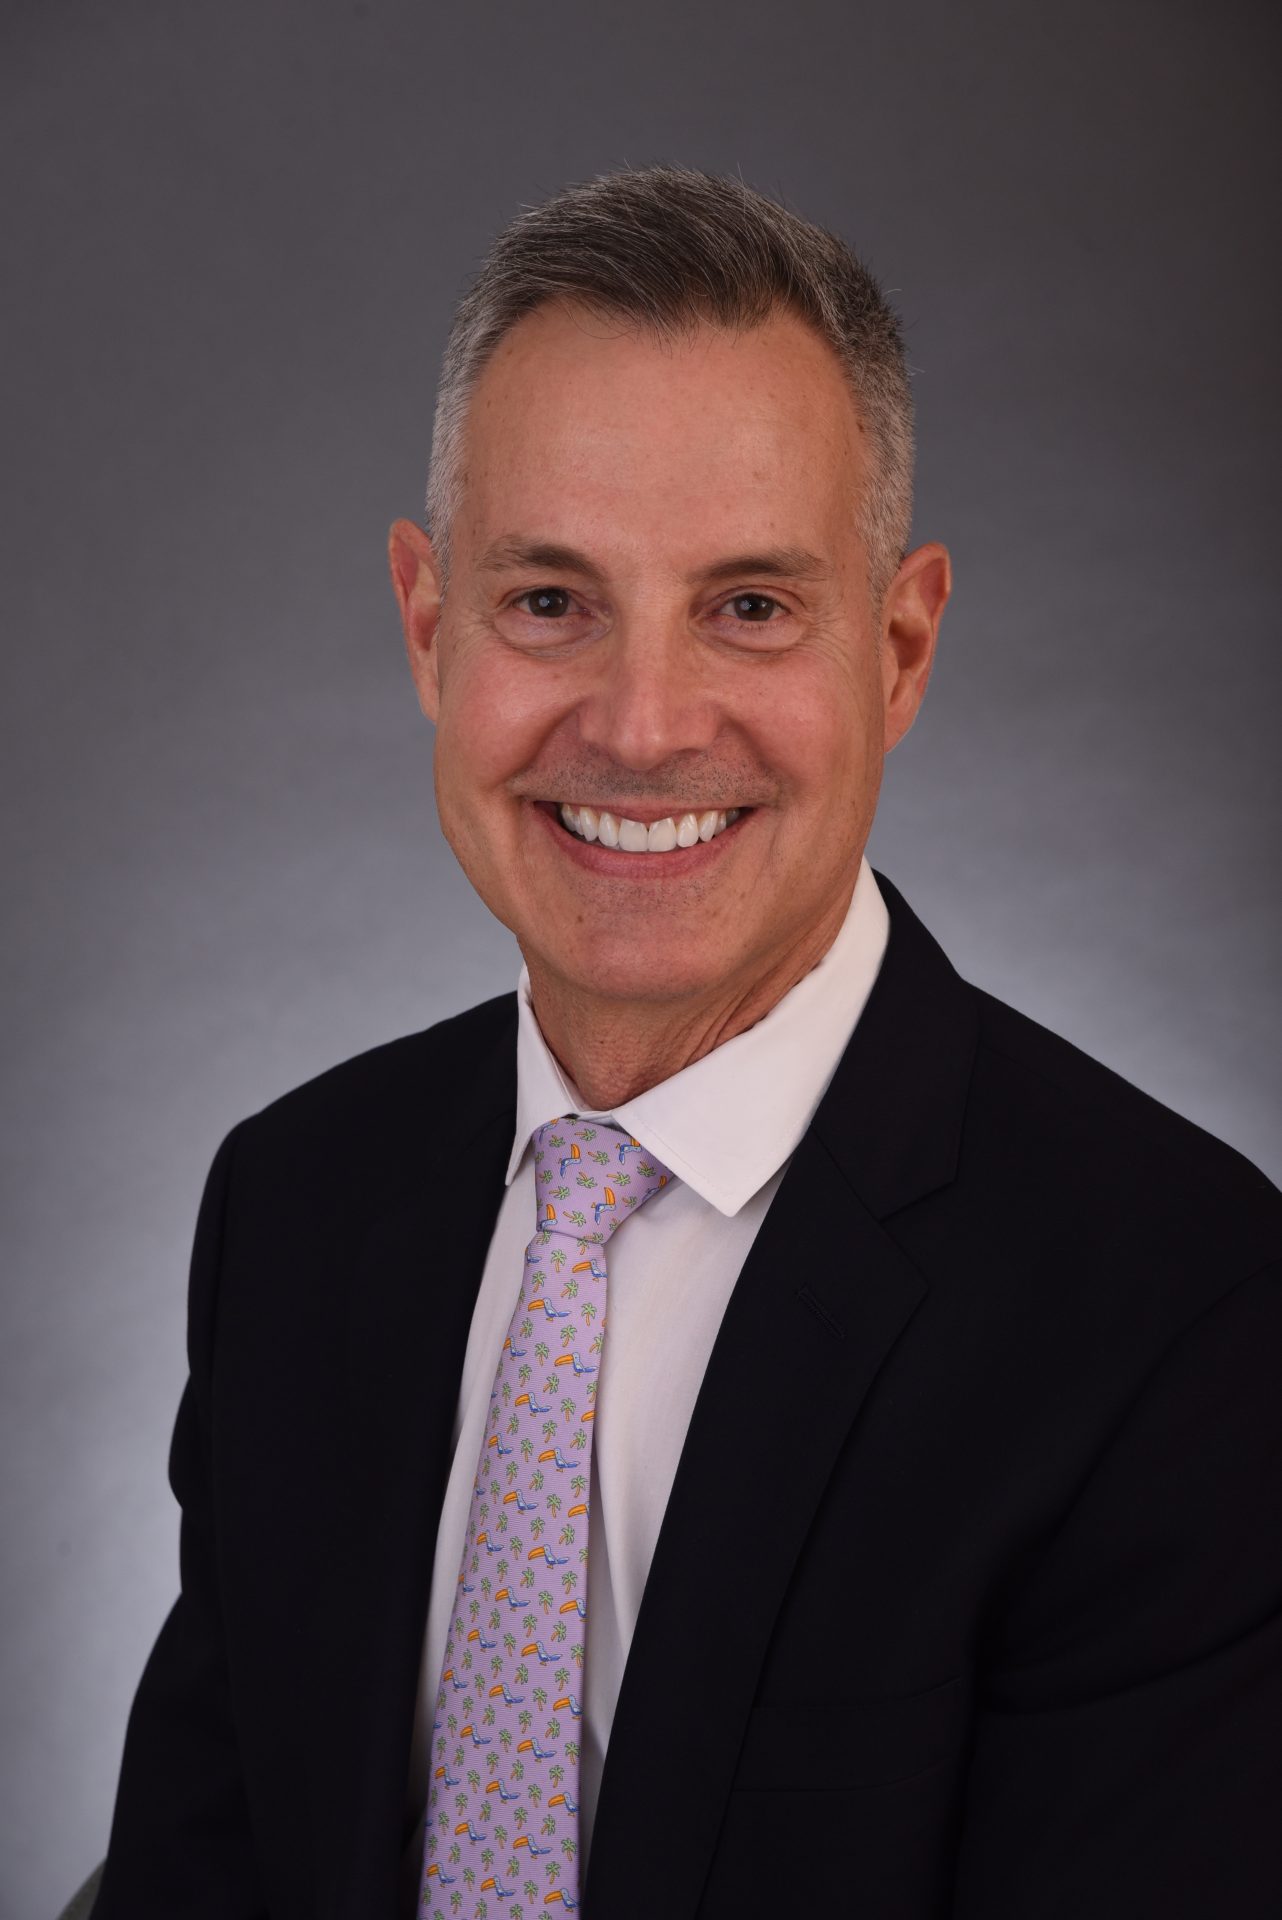 Image of Mark L. McMillen, the Bank's EVP, Chief Operating Officer.